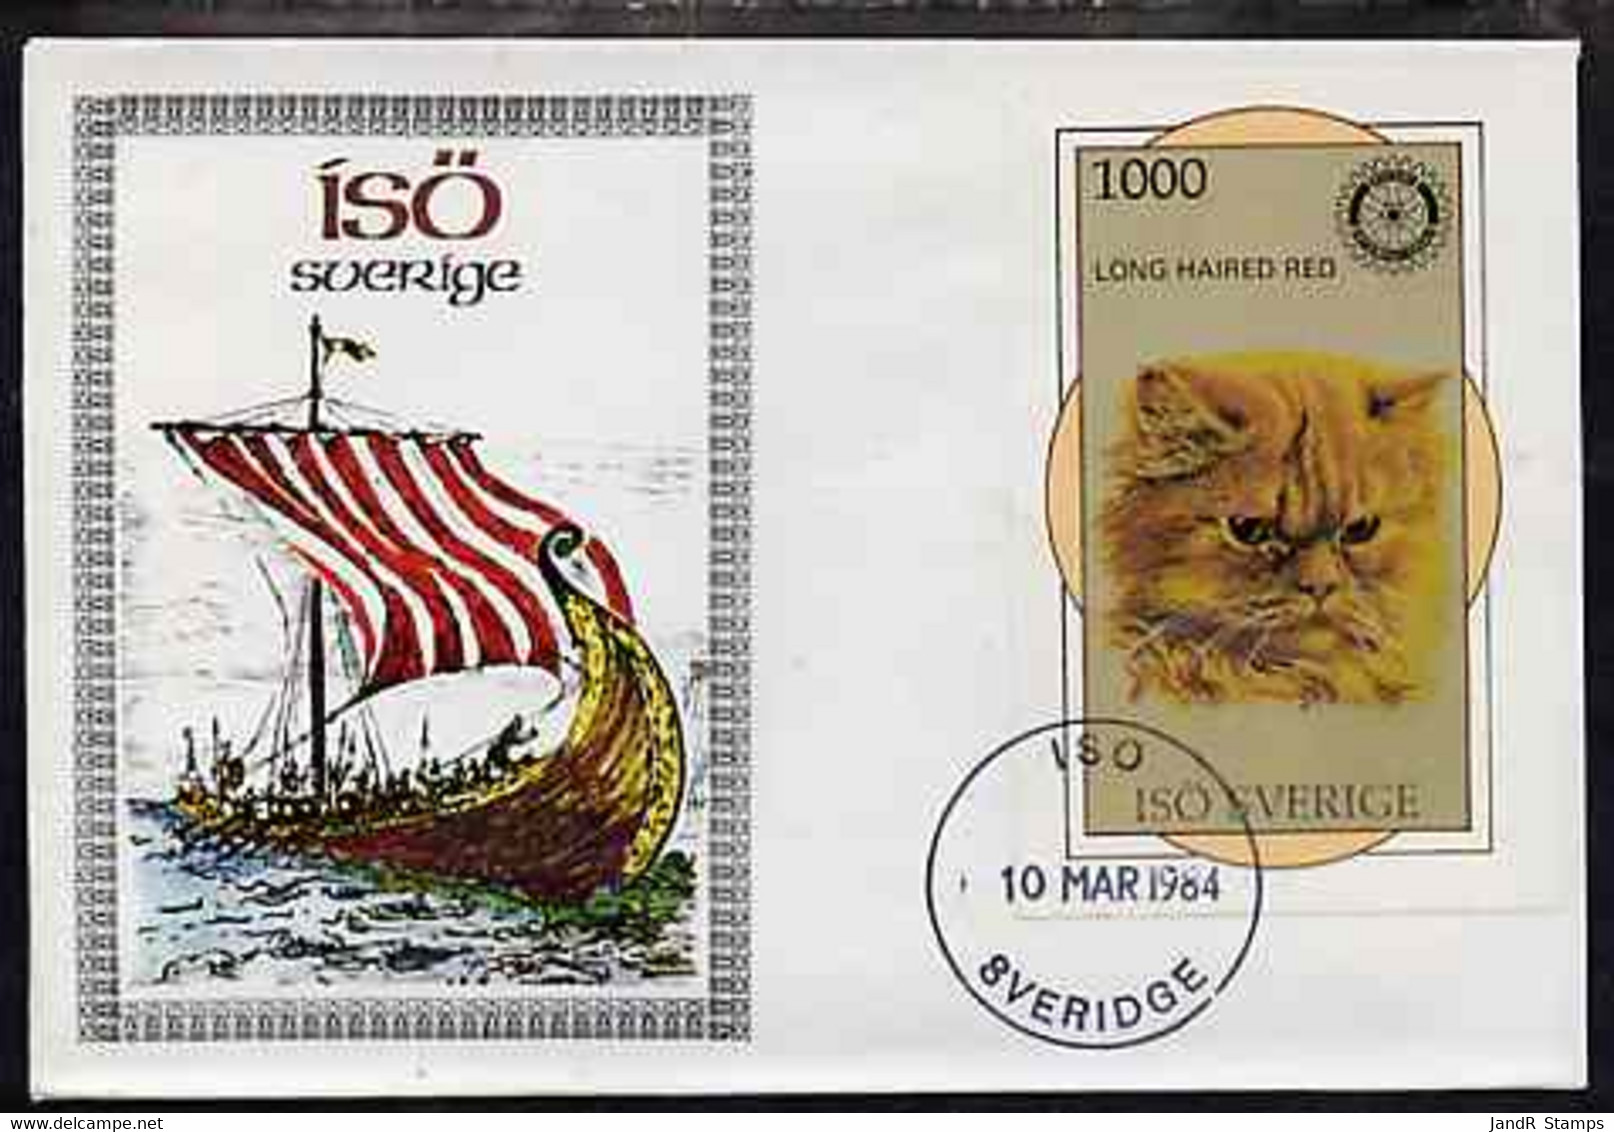 Iso - Sweden 1984 Rotary - Domestic Cats (Long Haired Red) Imperf Deluxe Sheet (1000 Value) On Cover With First Day Canc - Ortsausgaben